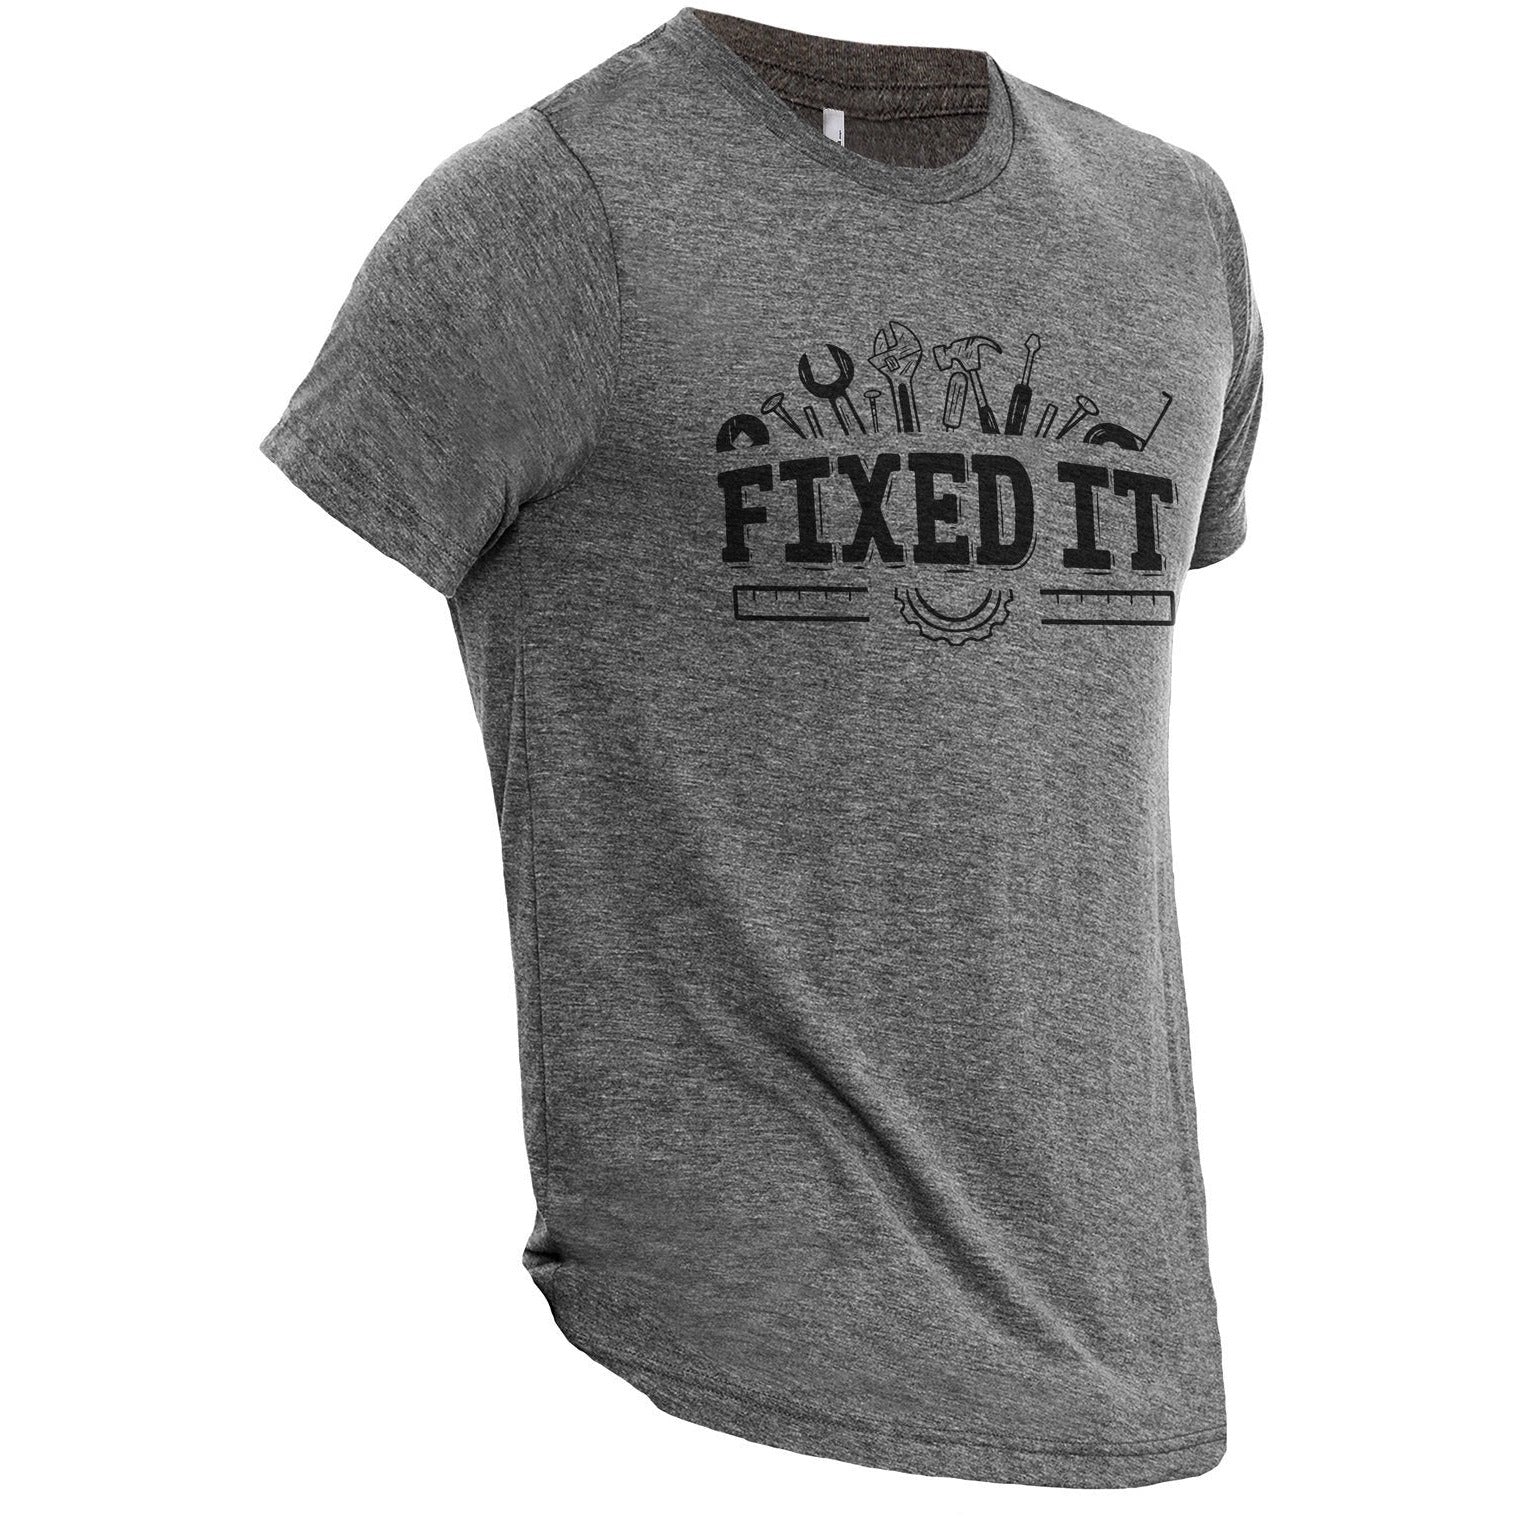 Fixed It Heather Grey Printed Graphic Men's Crew T-Shirt Tee Side View